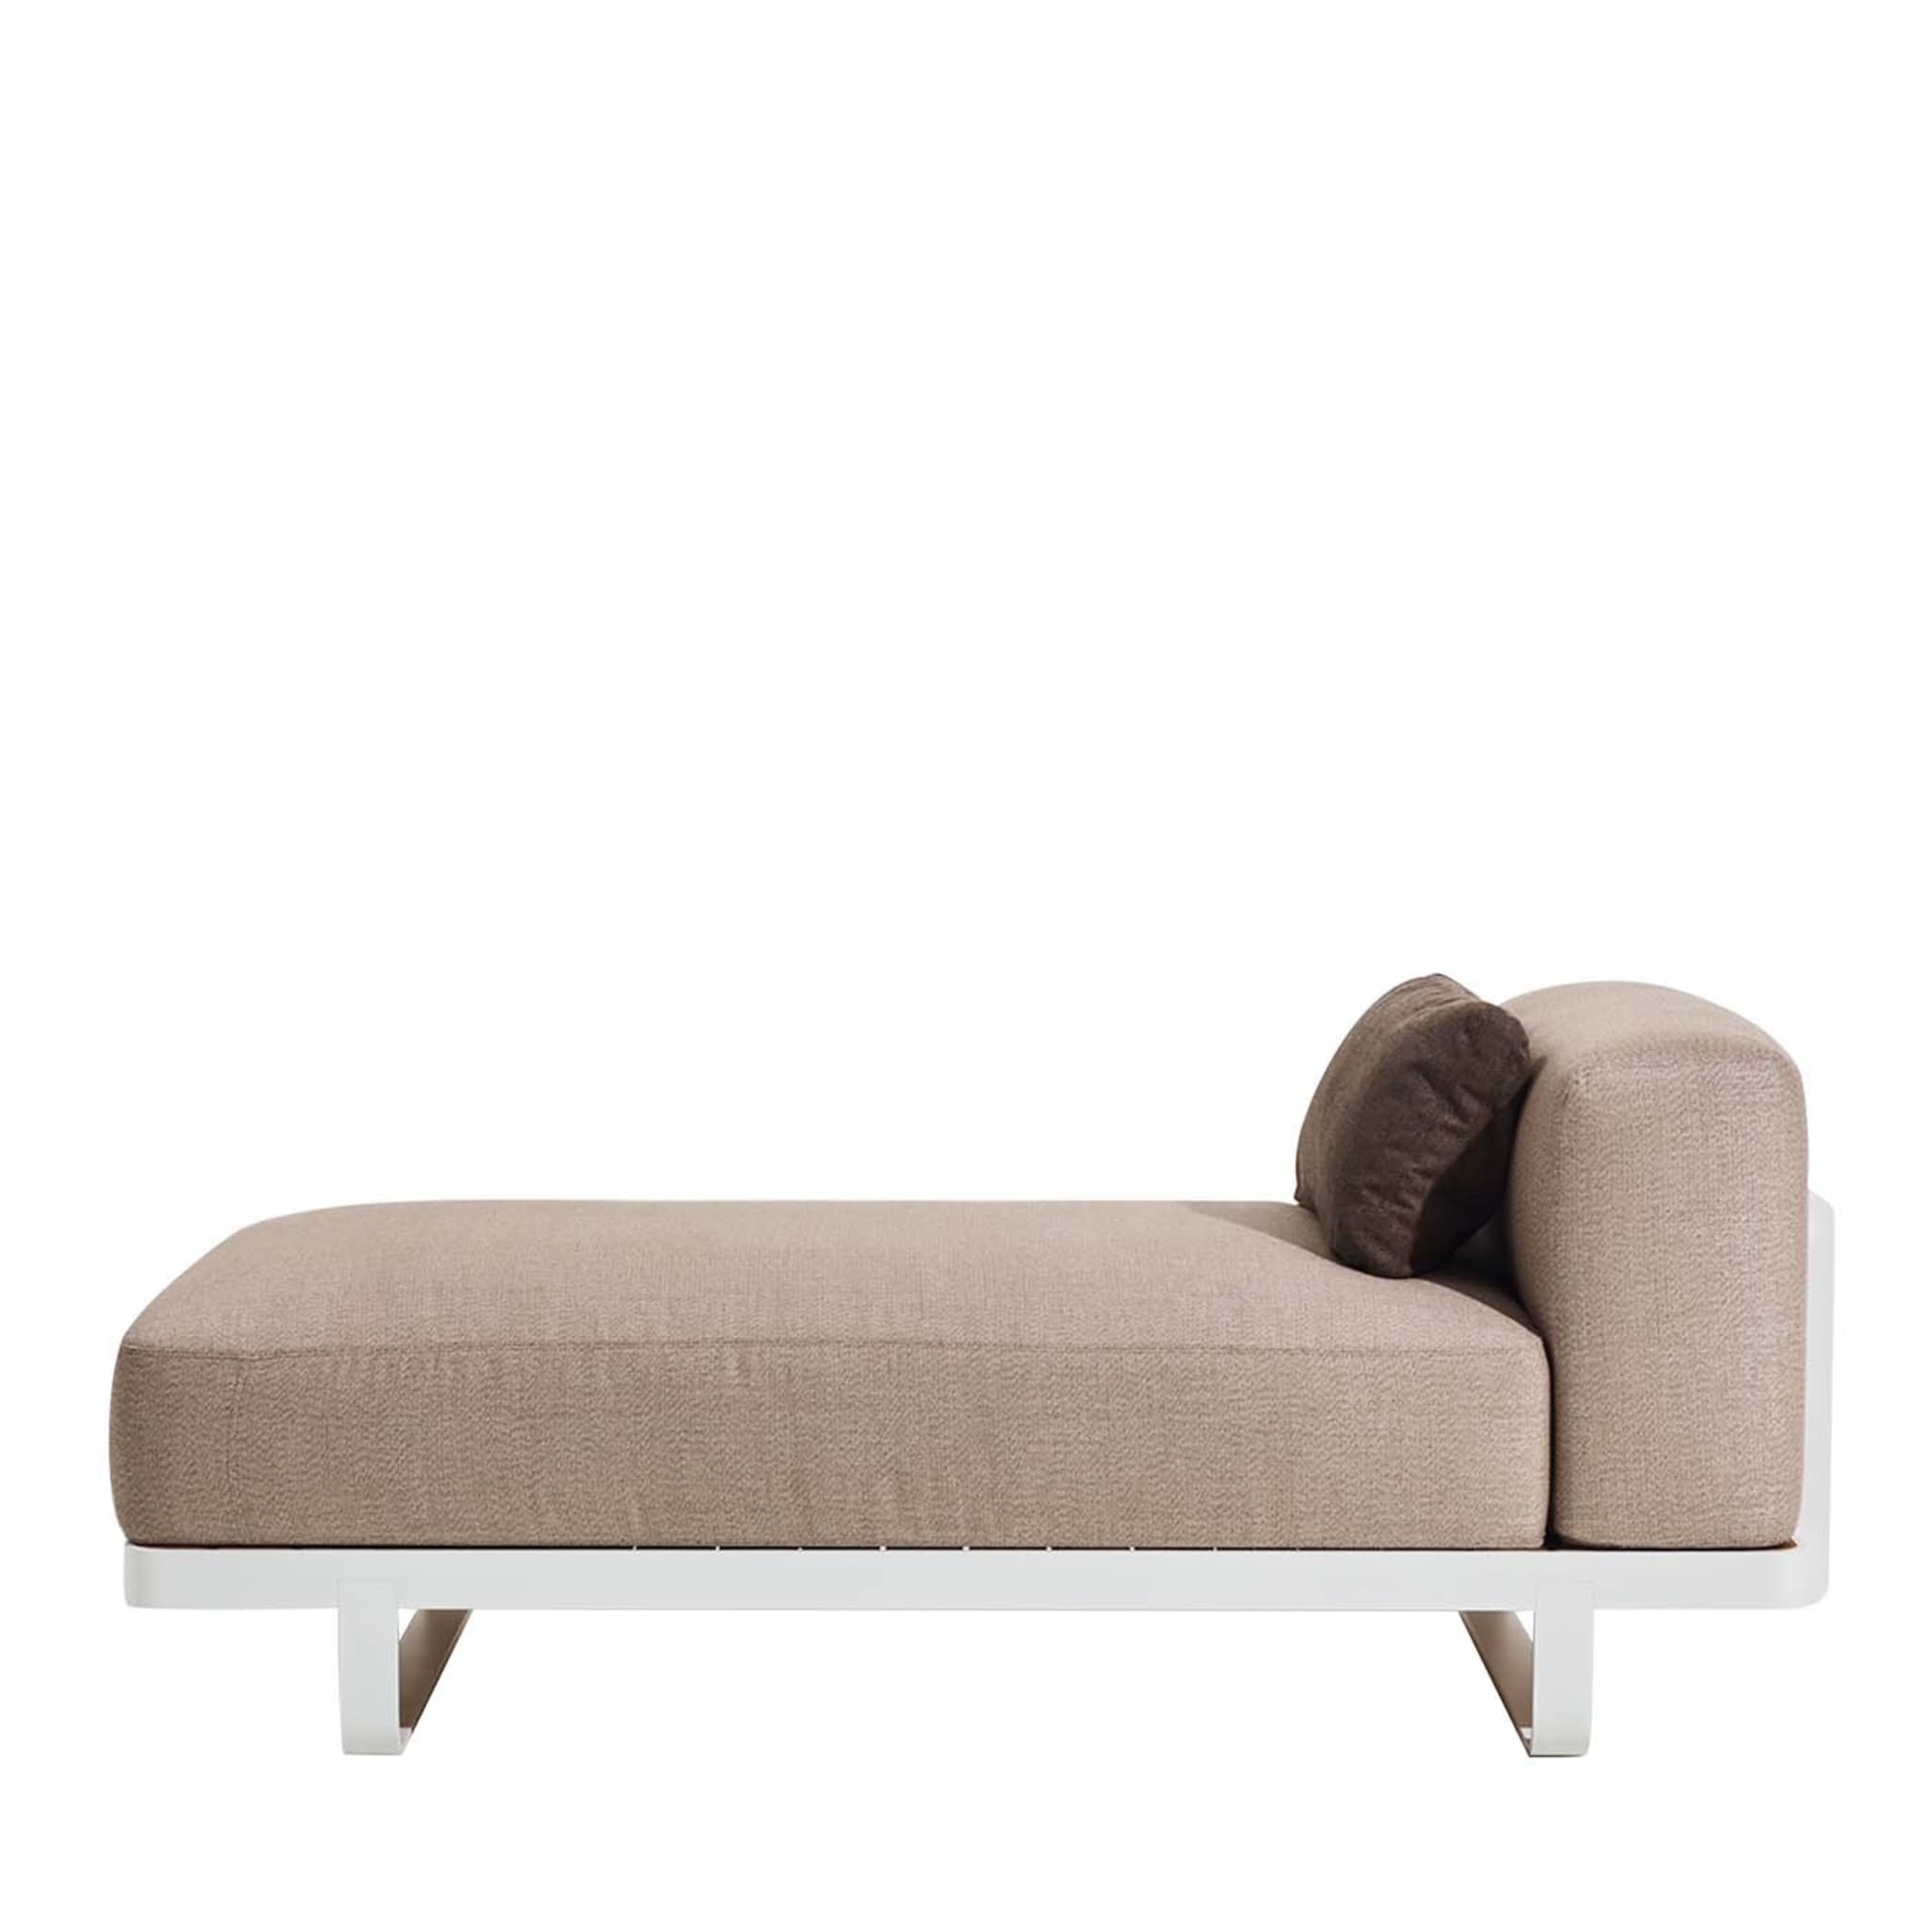 Makemake White and Beige Chaise Longue - Main view